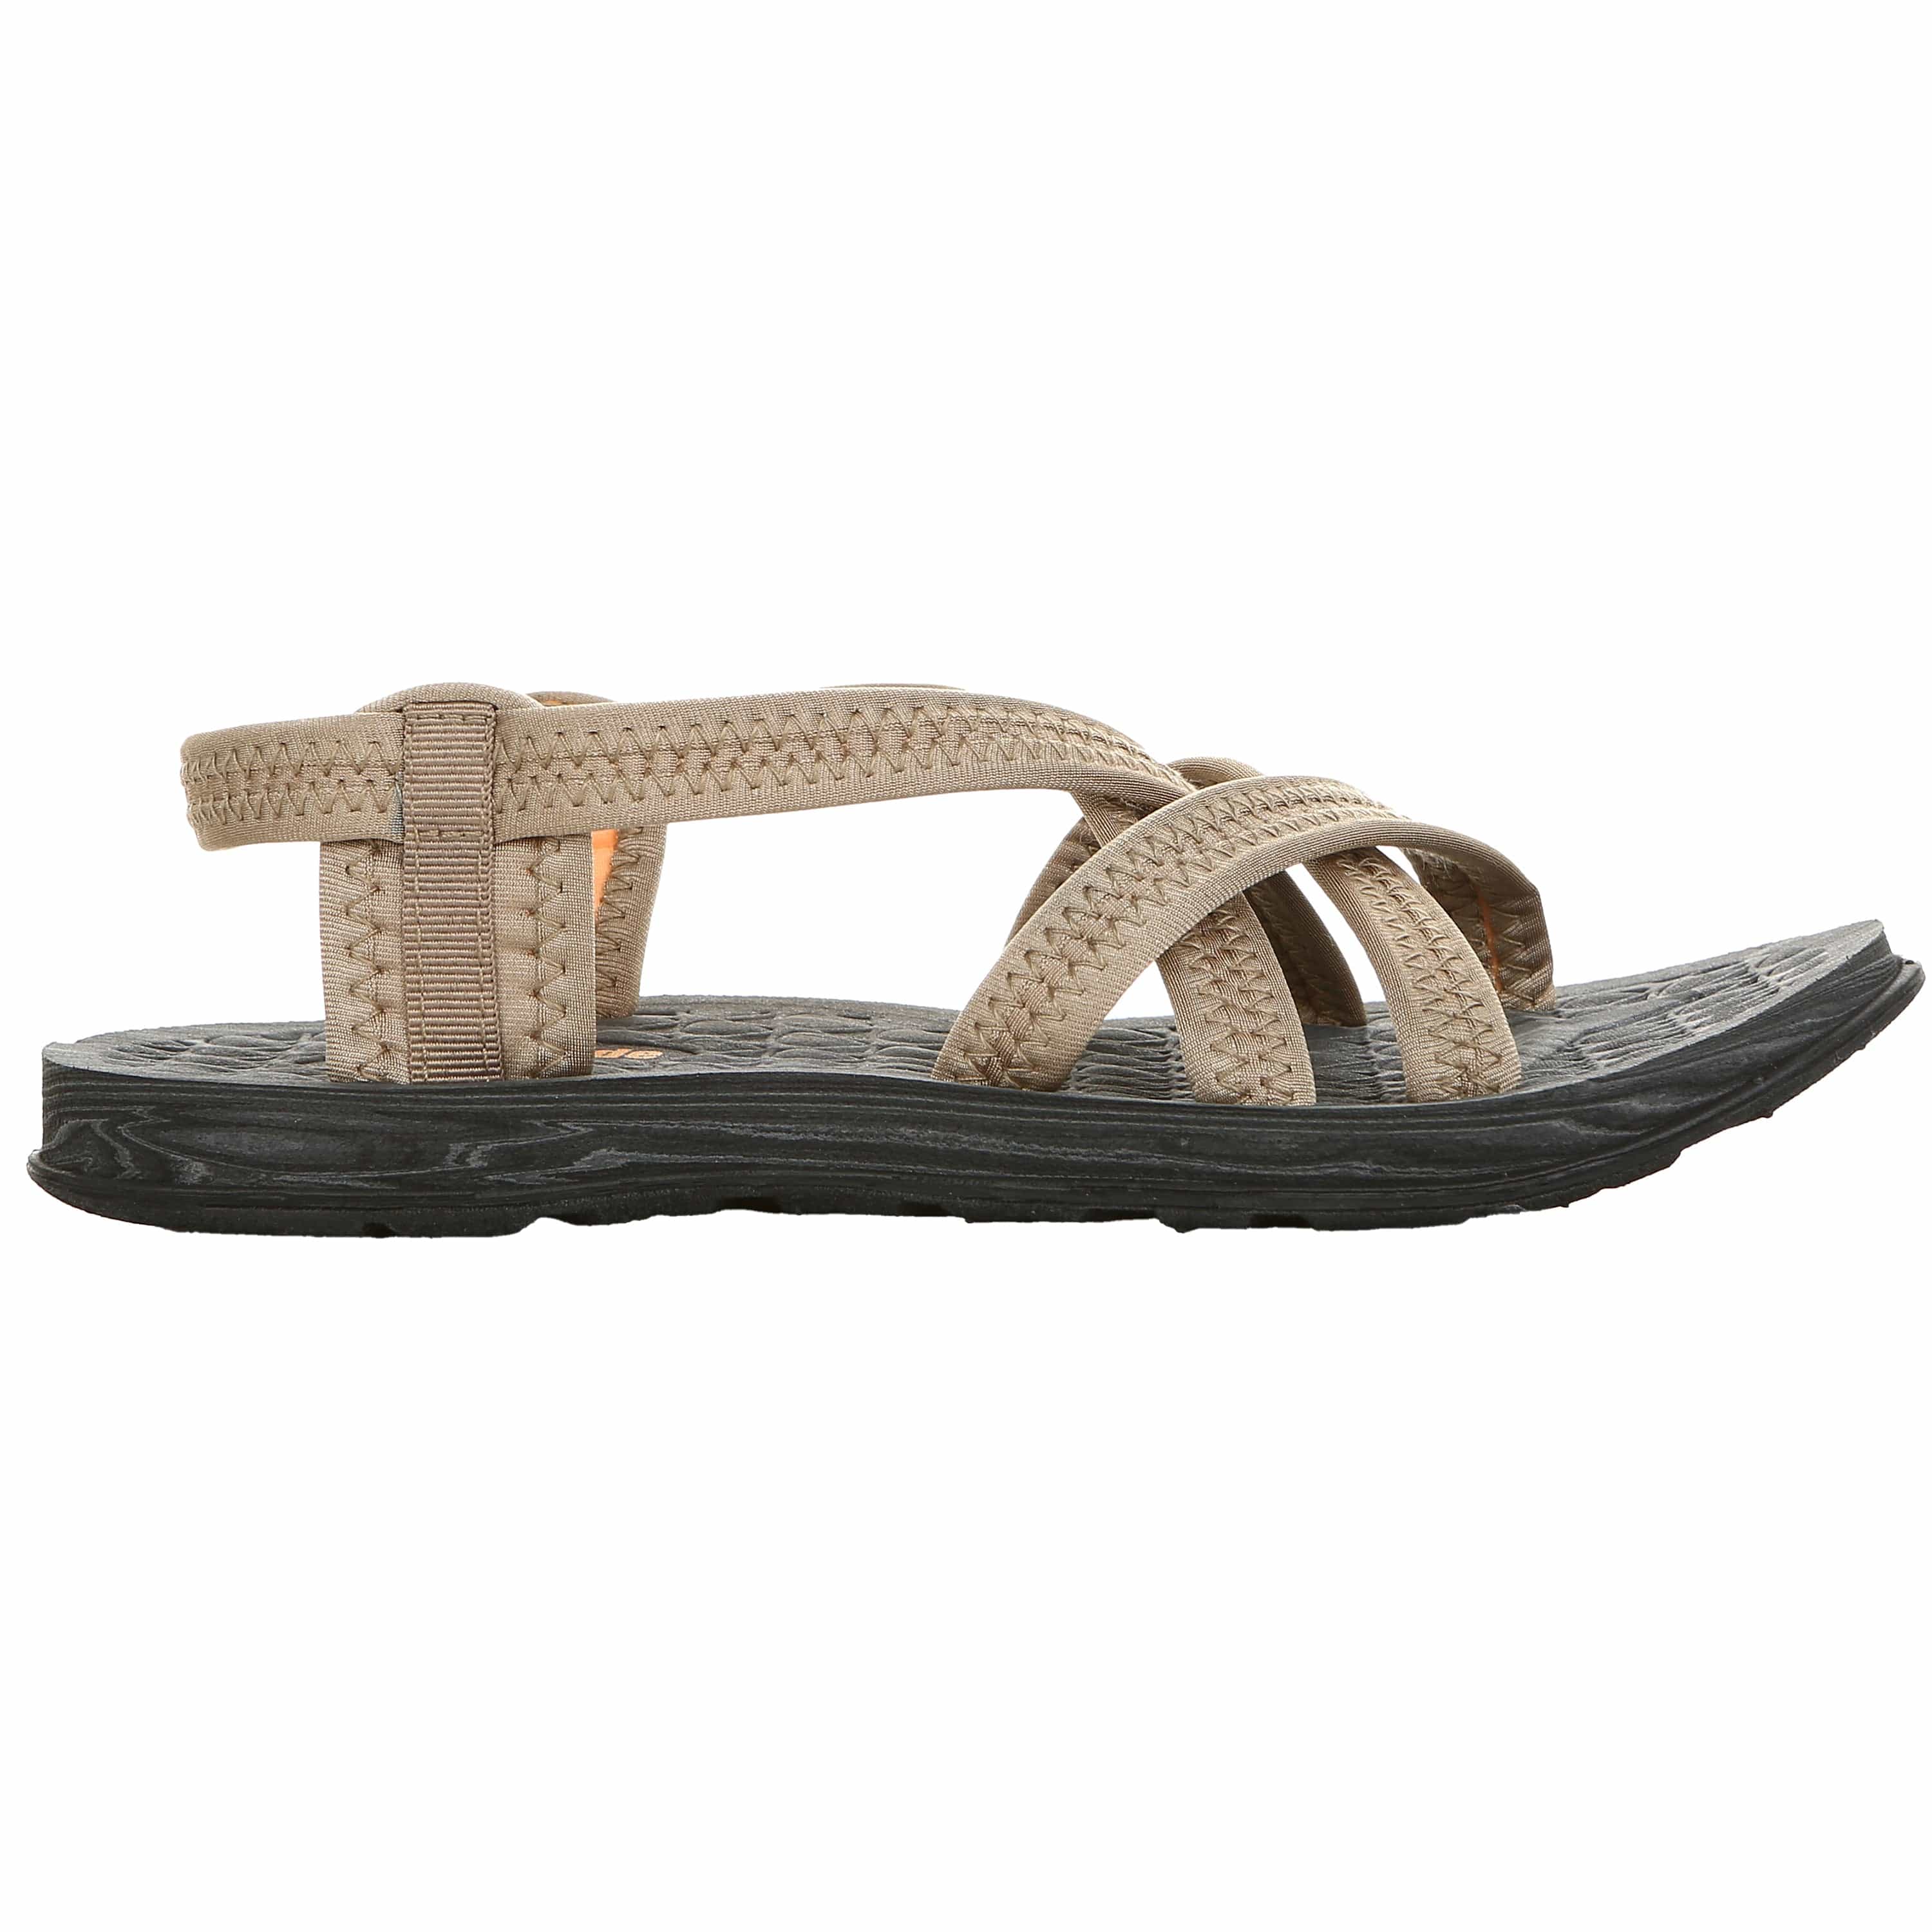 Buy DR. COMFORT SANDALS FOR WOMEN/GIRLS WITH CUSHION INSOLE at Amazon.in